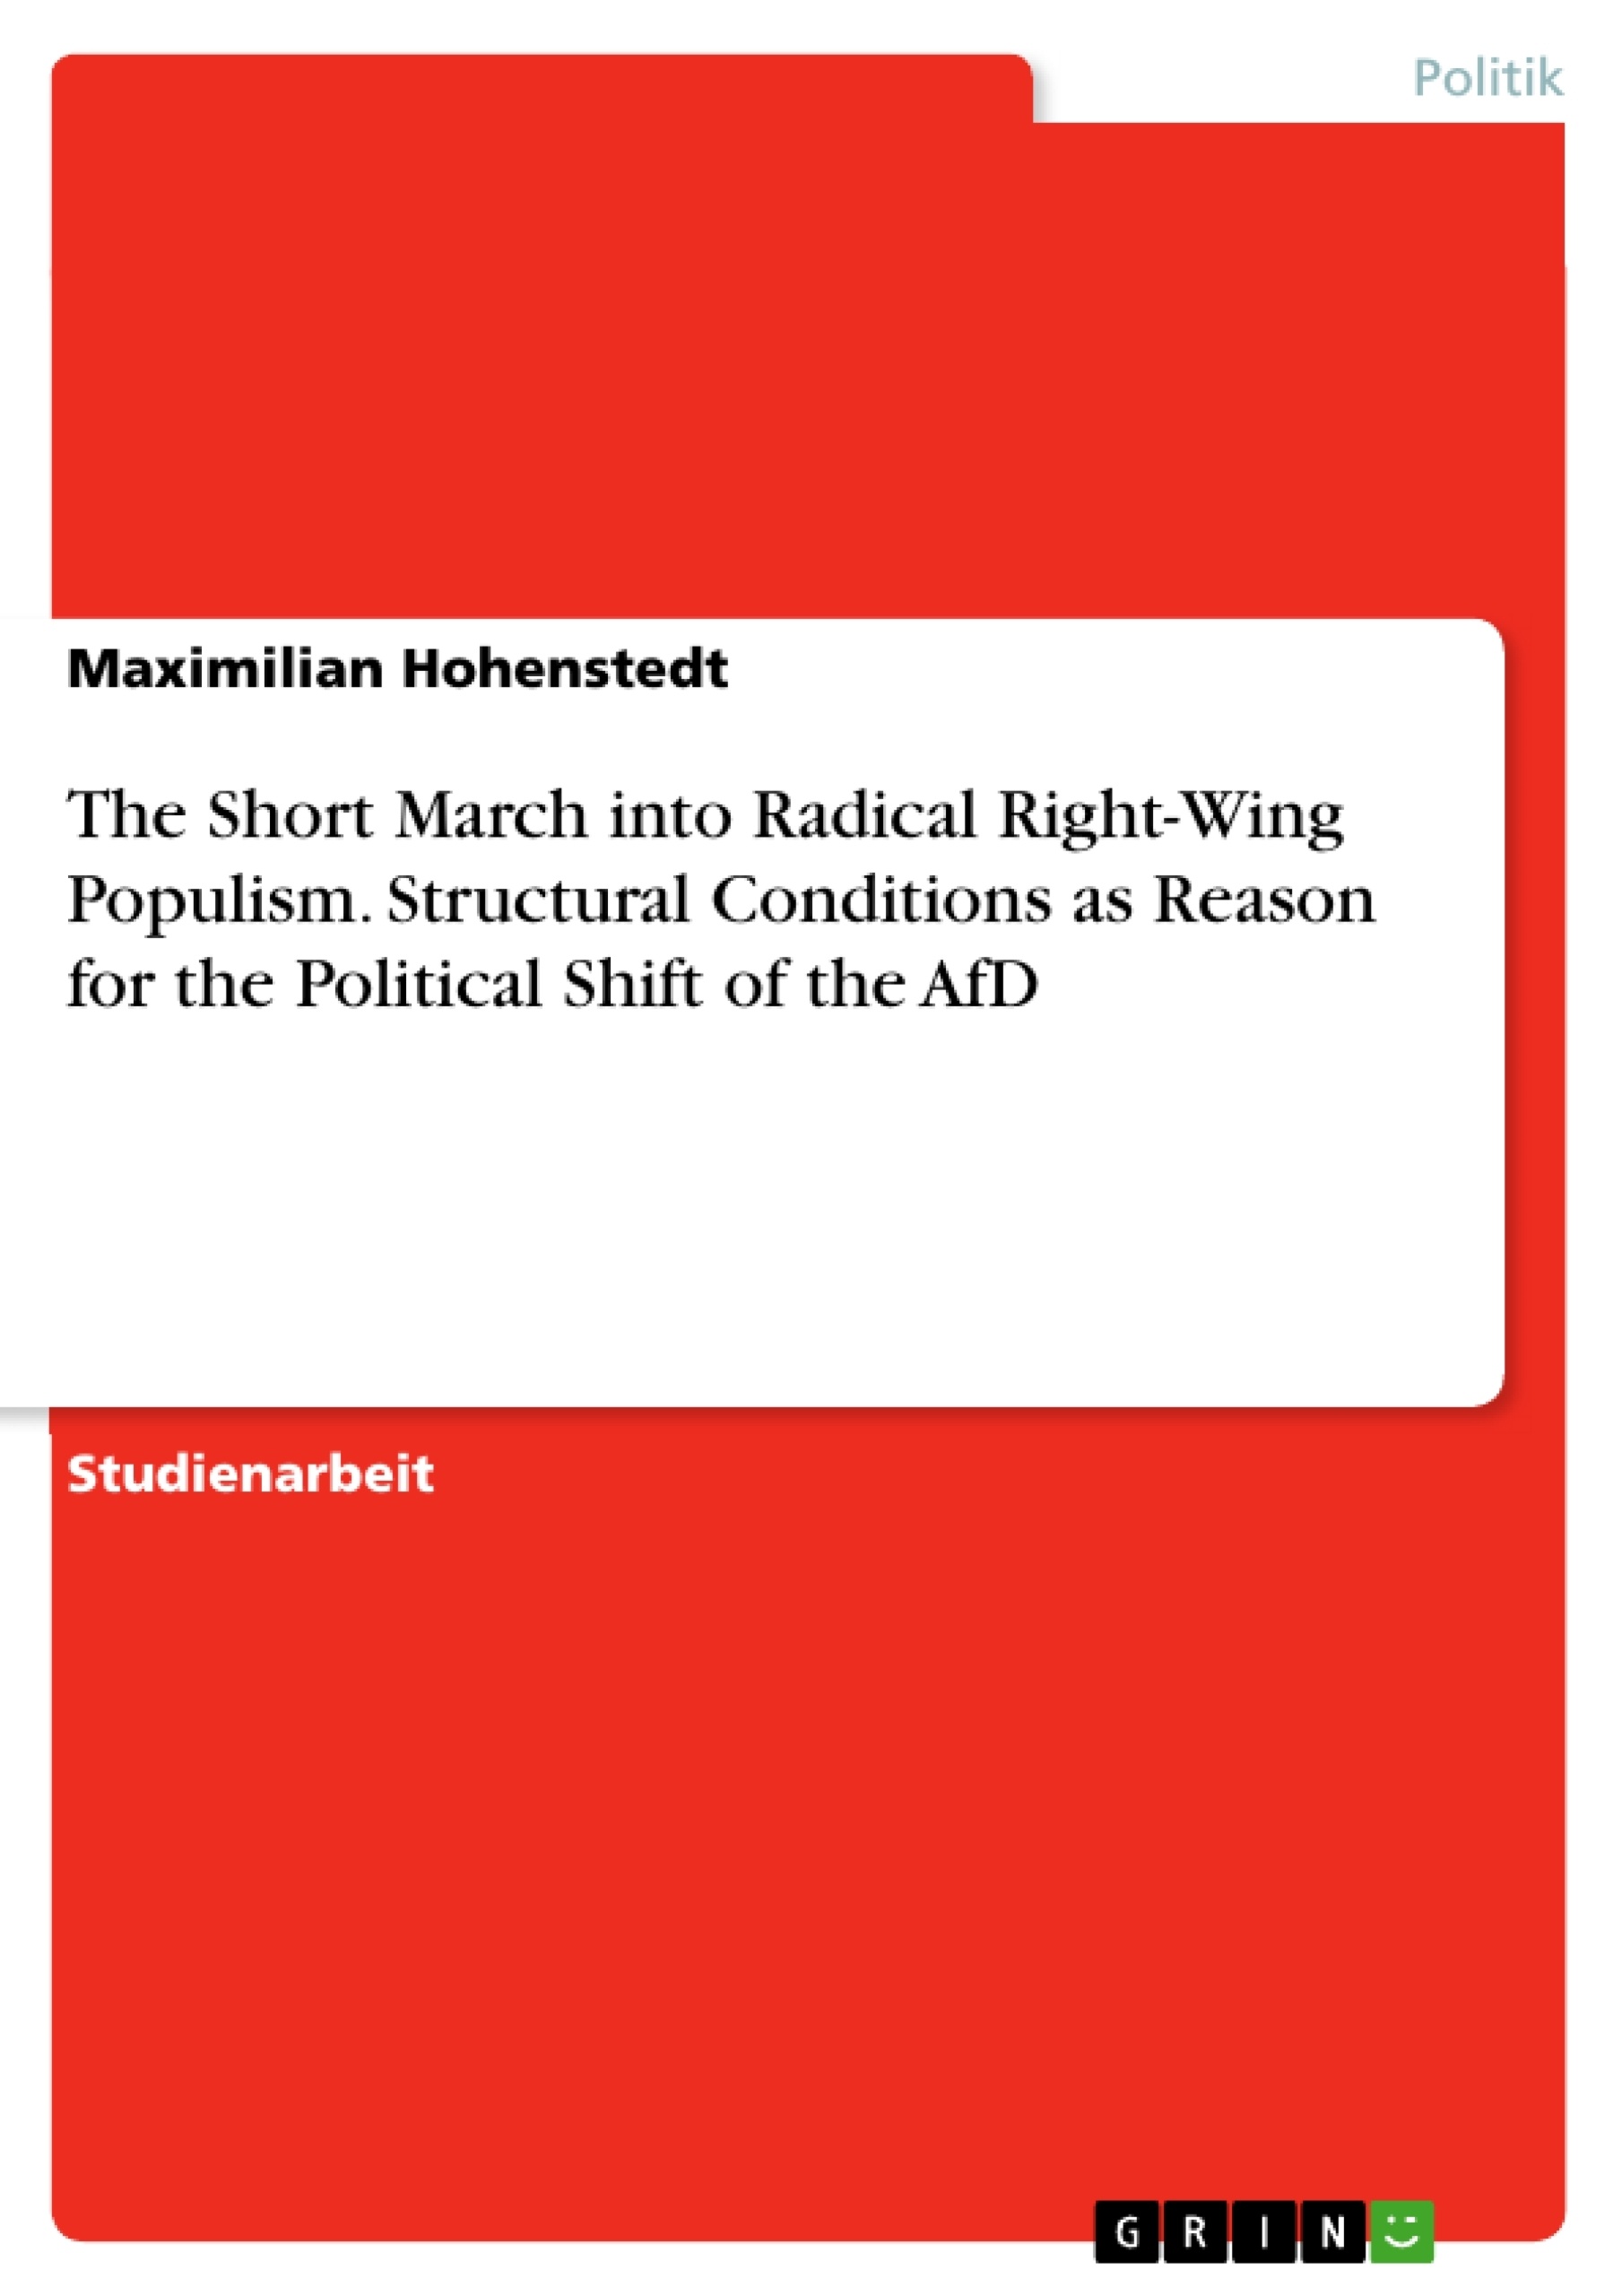 Titel: The Short March into Radical Right-Wing Populism. Structural Conditions as Reason for the Political Shift of the AfD